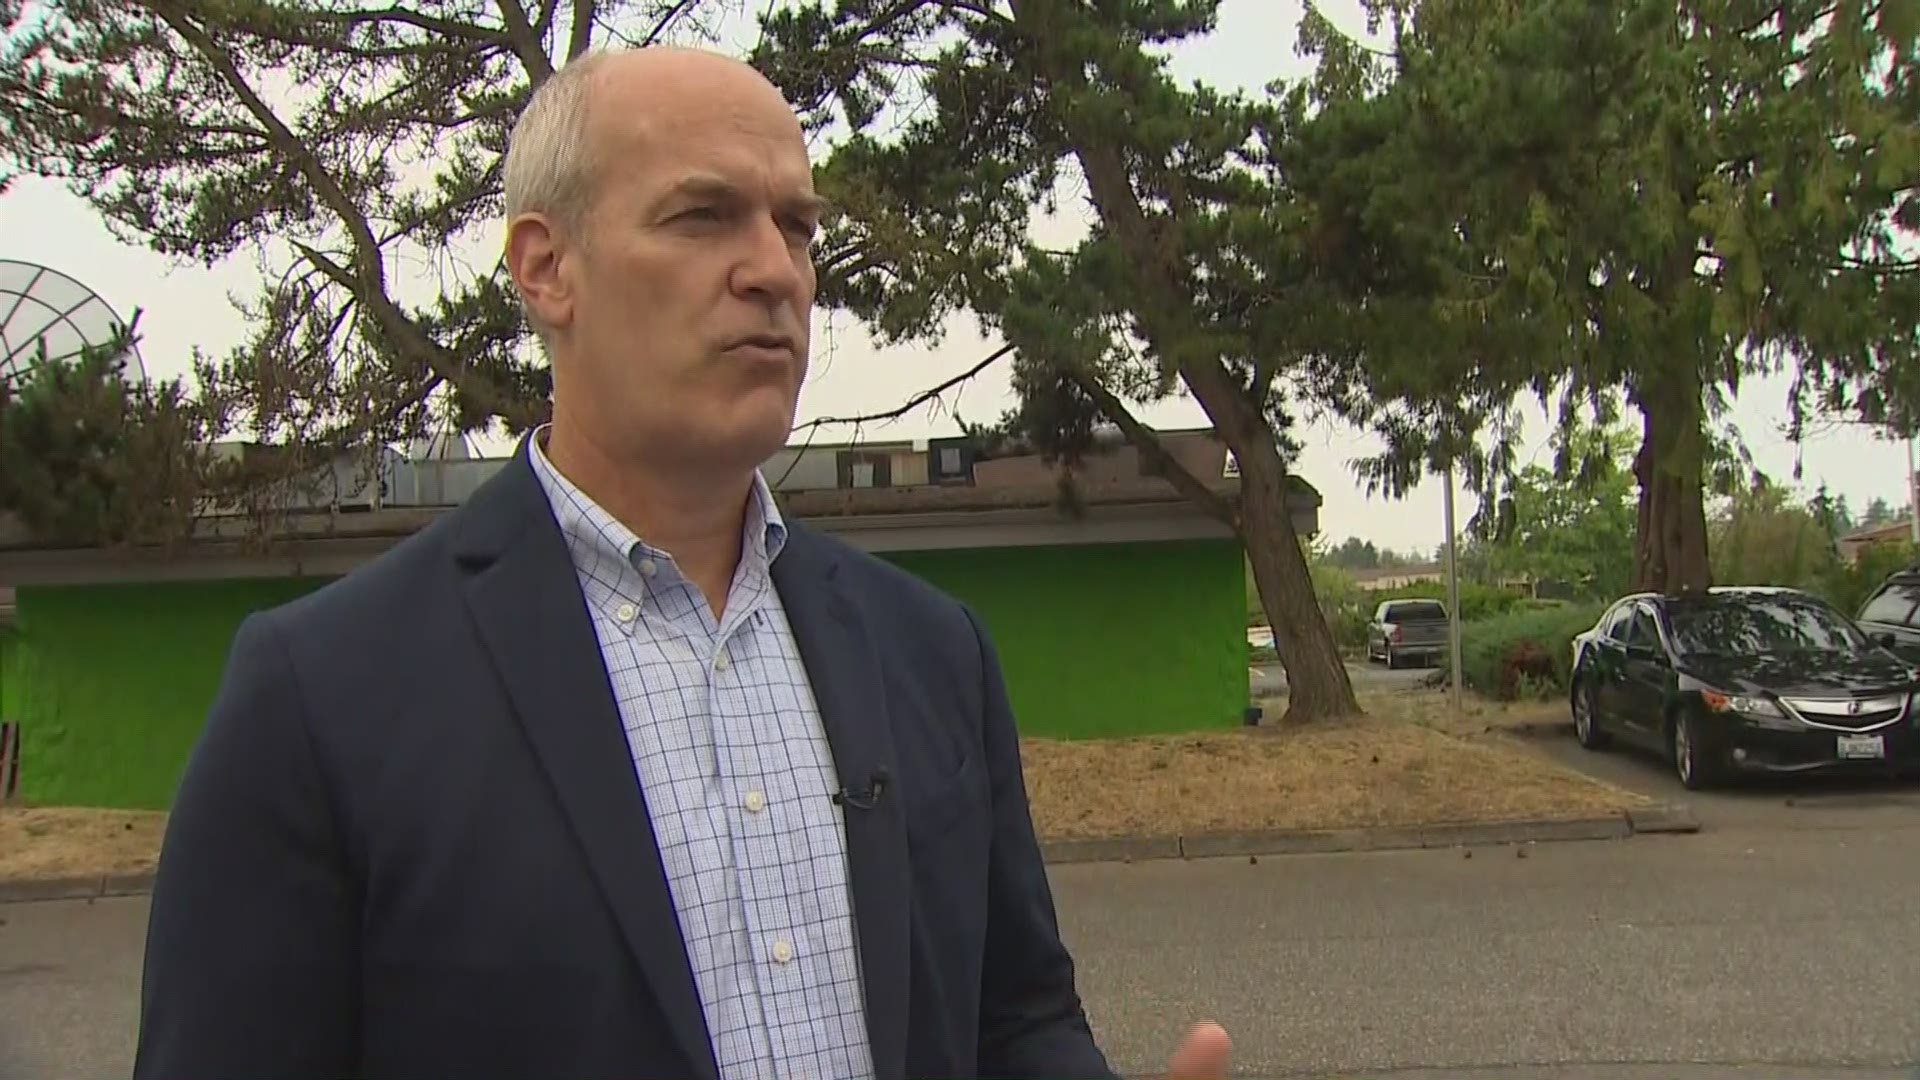 Rep. Rick Larsen speaks to KING 5 about Friday's plane theft from Sea-Tac International Airport